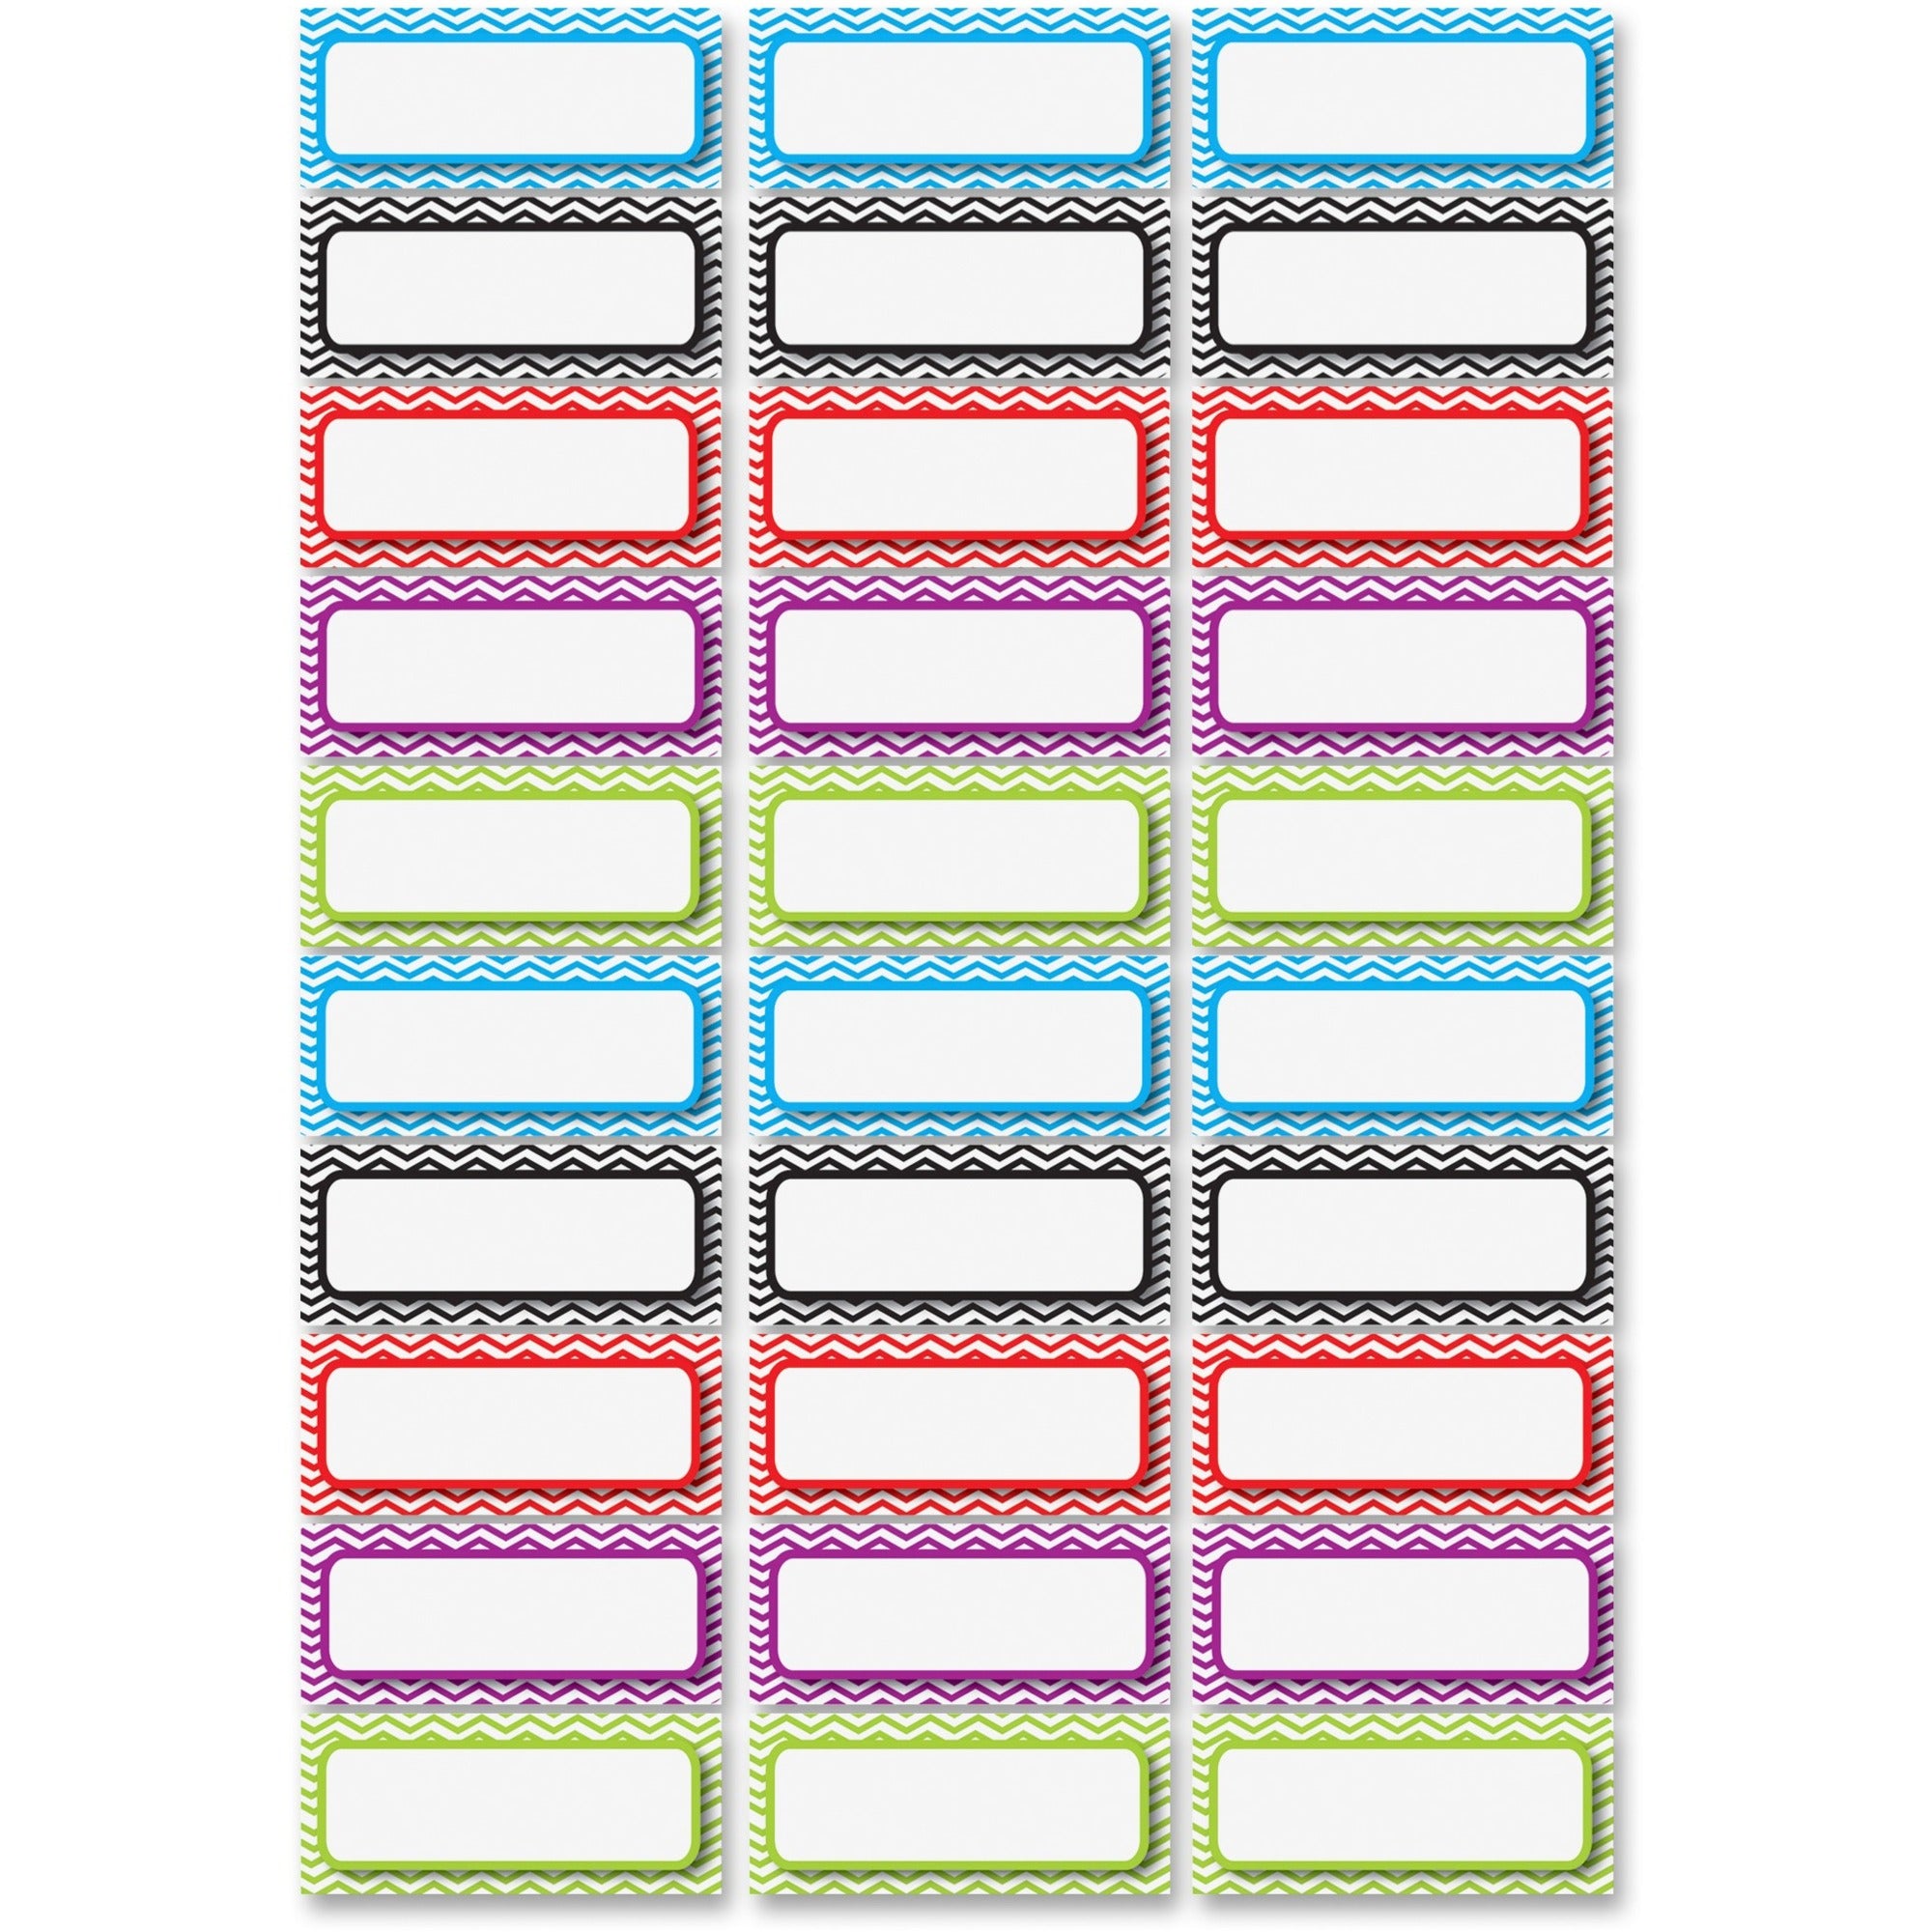 Ashley Dry Erase Chevron Nameplate Magnets - 30 x Rectangle Shape - Magnetic - Chevron - Die-cut, Write on/Wipe off, Heavy Duty - Multicolor - Foam - 1 / Pack